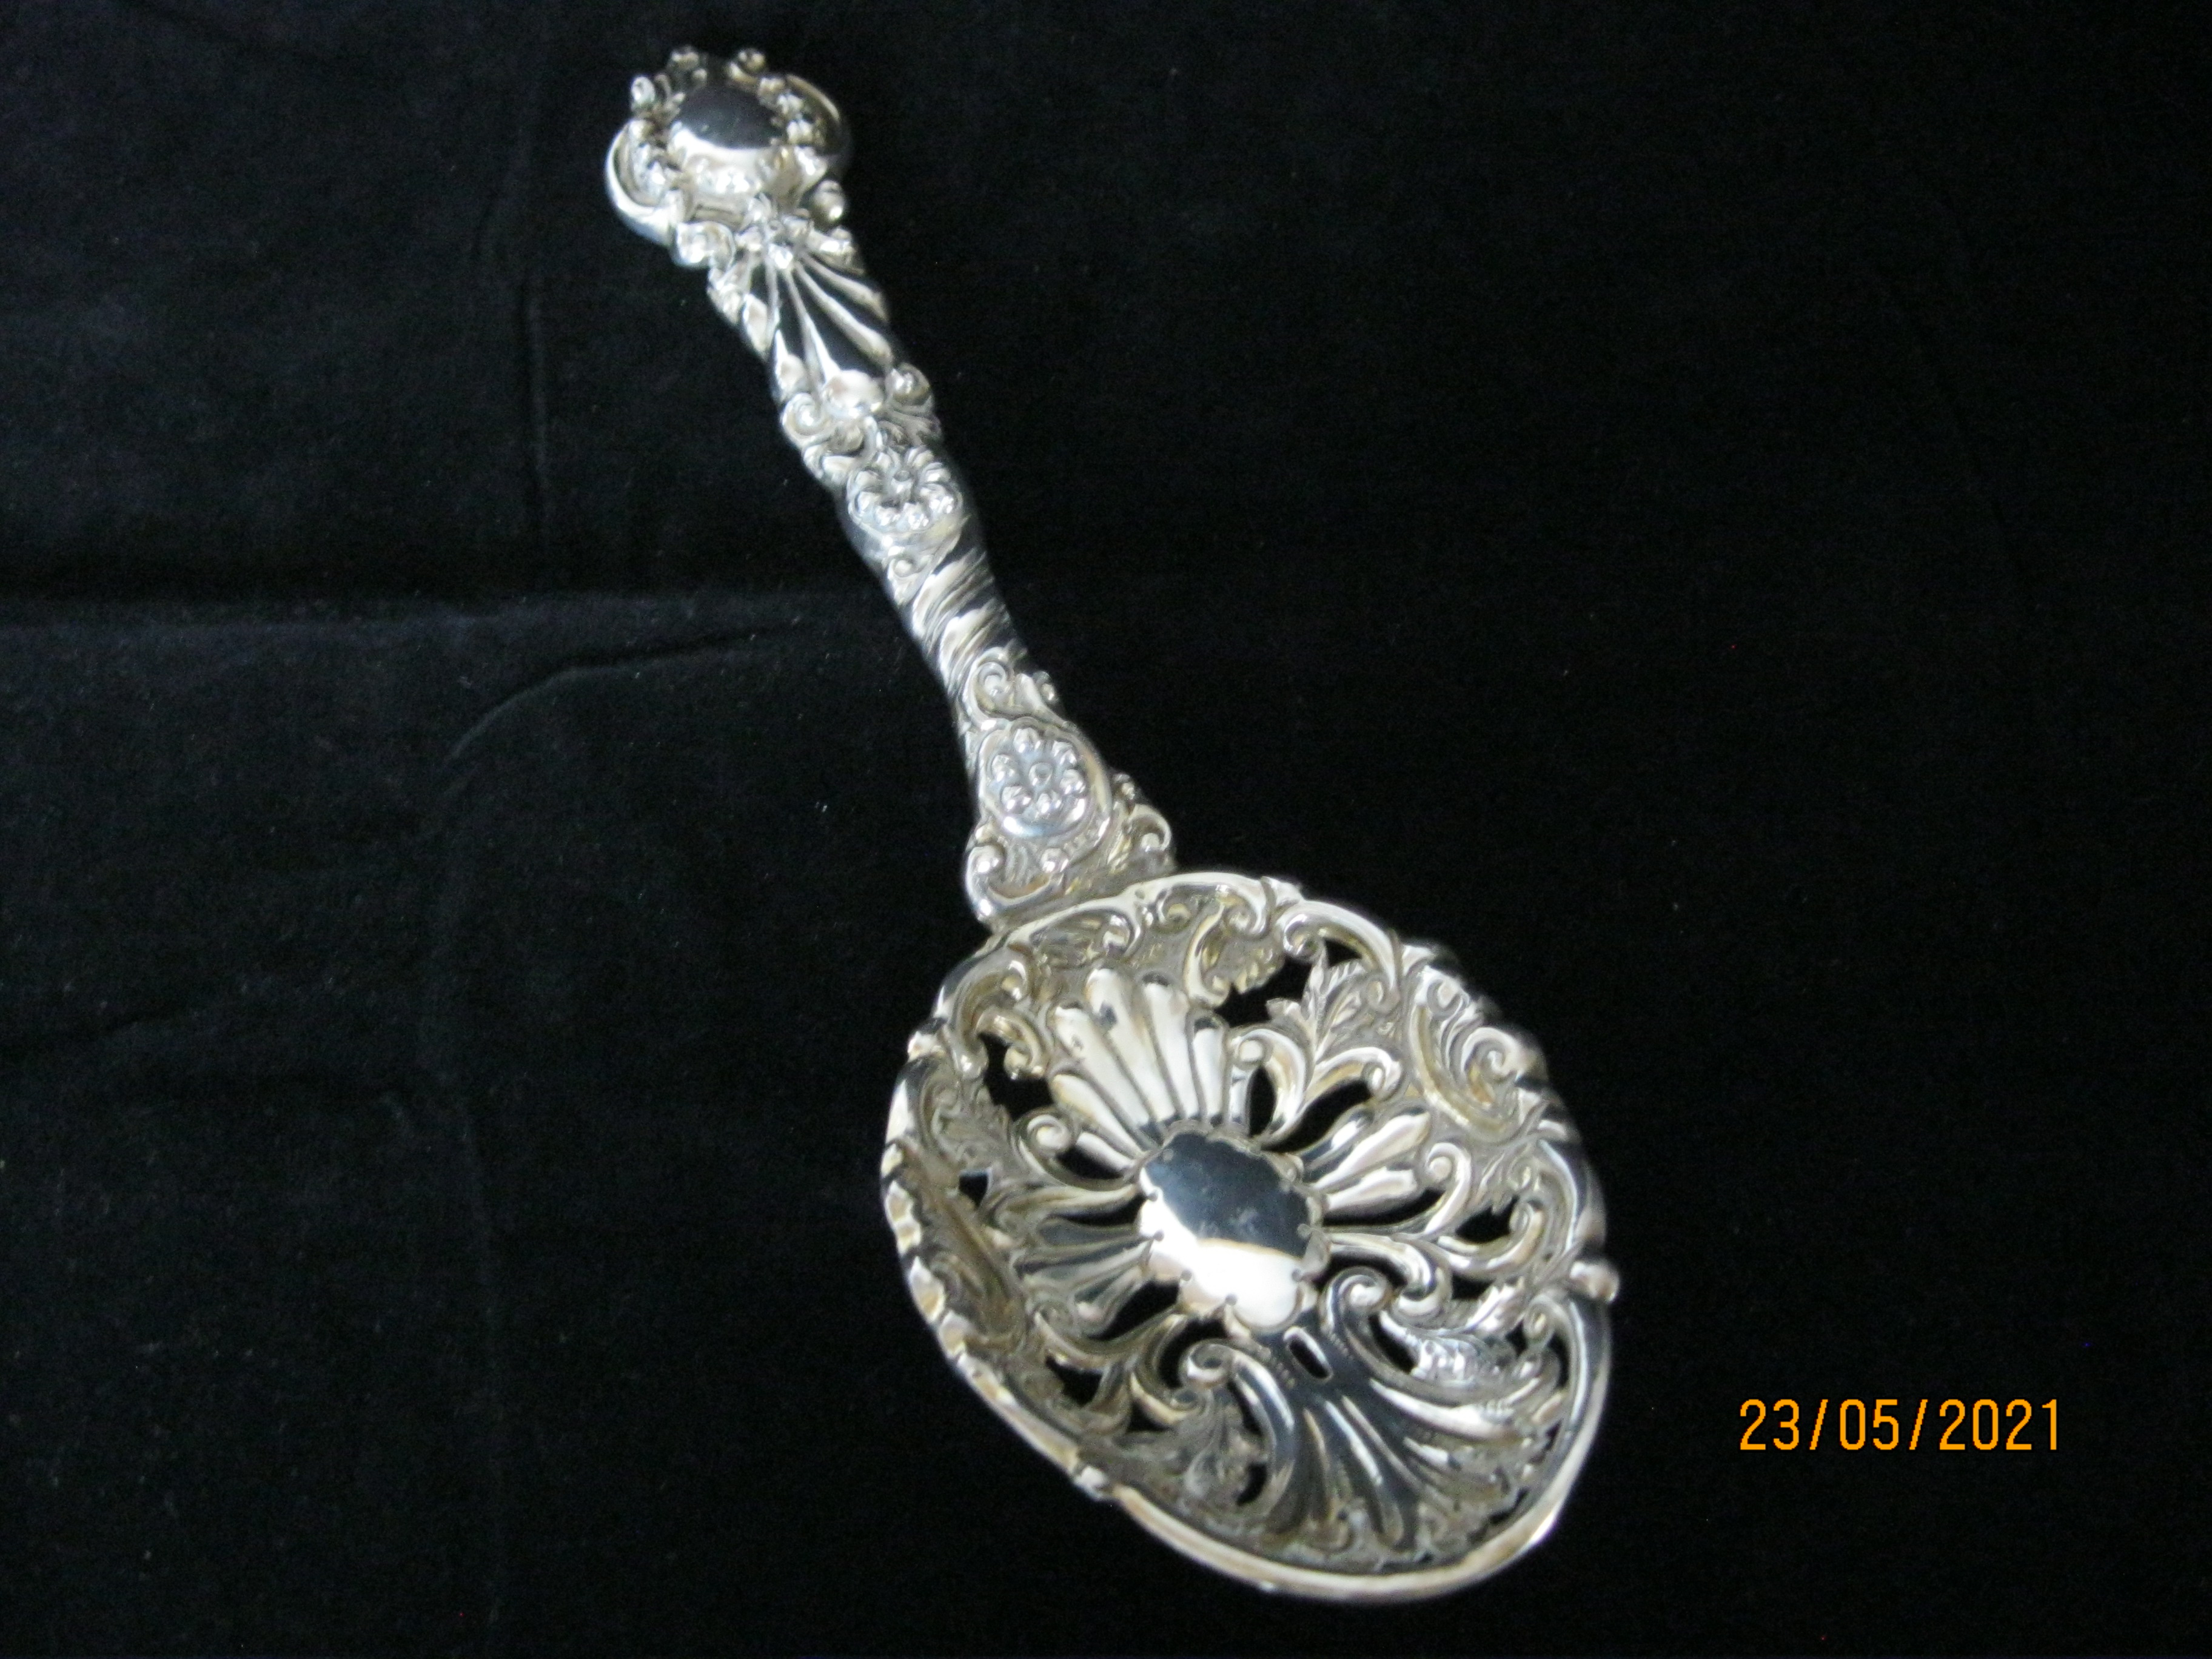 Antique Solid Silver Berry Spoon 1899 London - Image 6 of 6